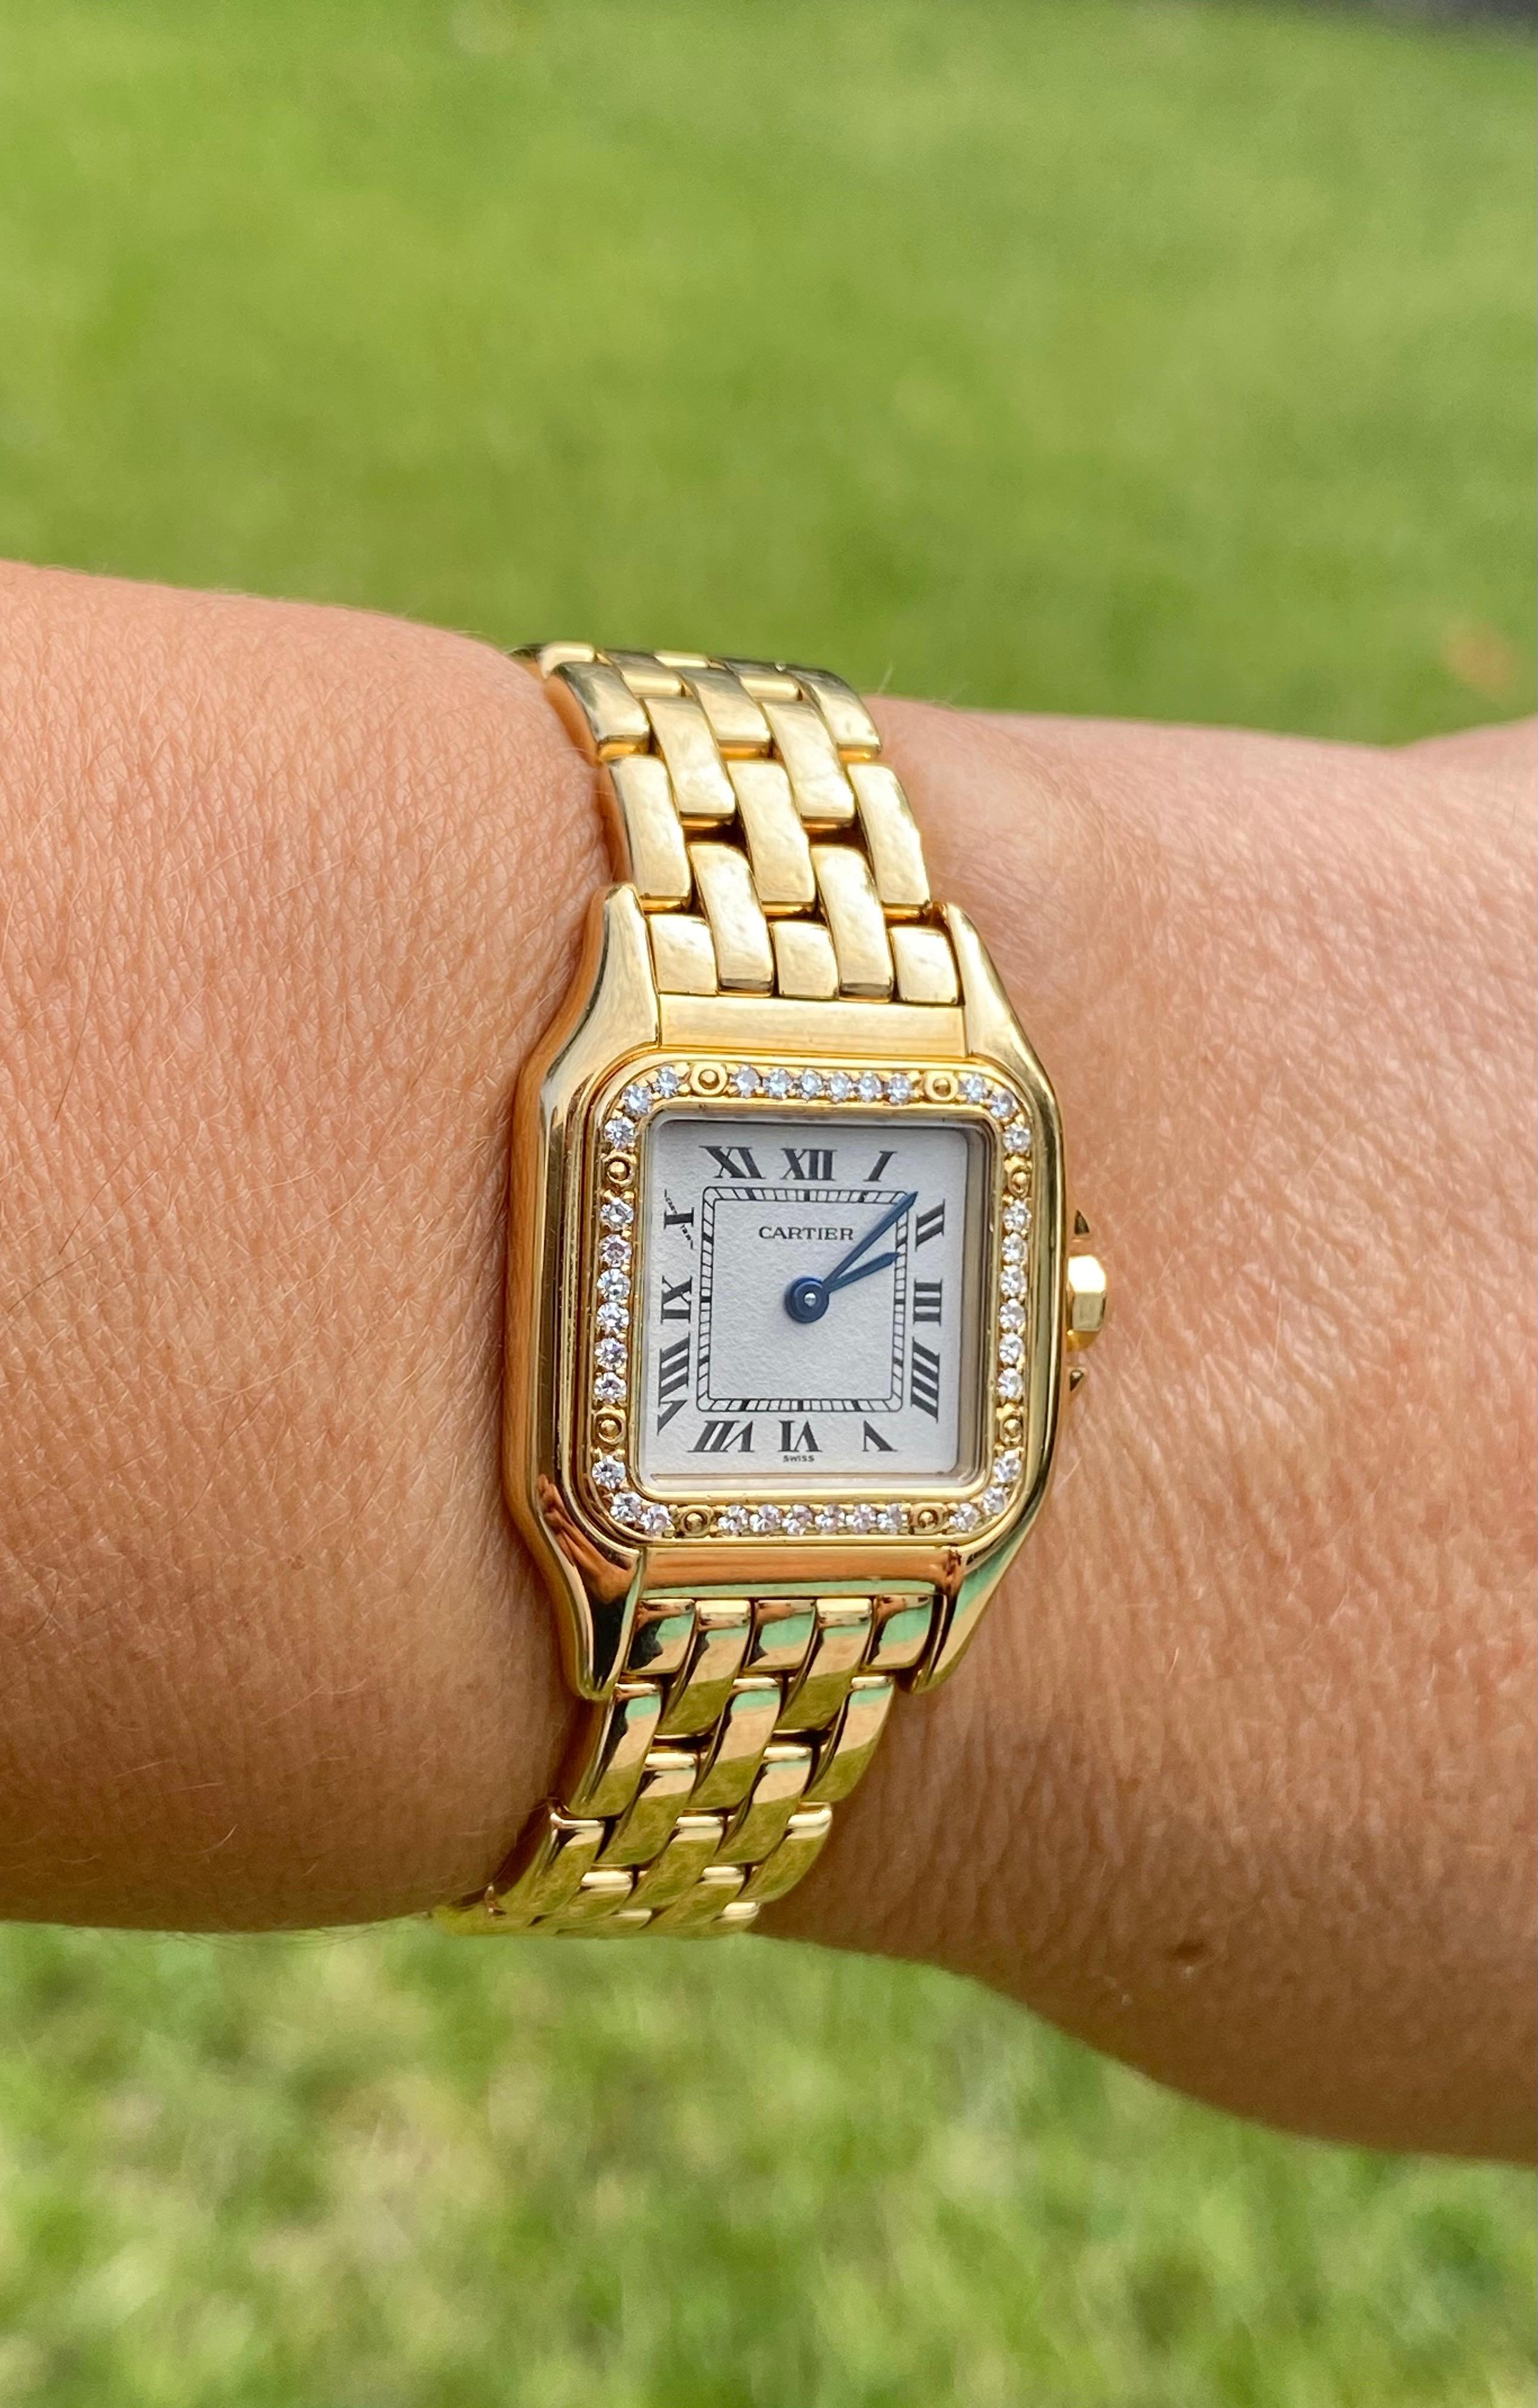 Vintage Cartier de Panthere wrist watch for women. Panthere de Cartier series with all original Cartier factory diamonds. Sleek and slim, this Cartier watch is in near perfect condition. Quite extraordinary considering pieces over 20-year history.